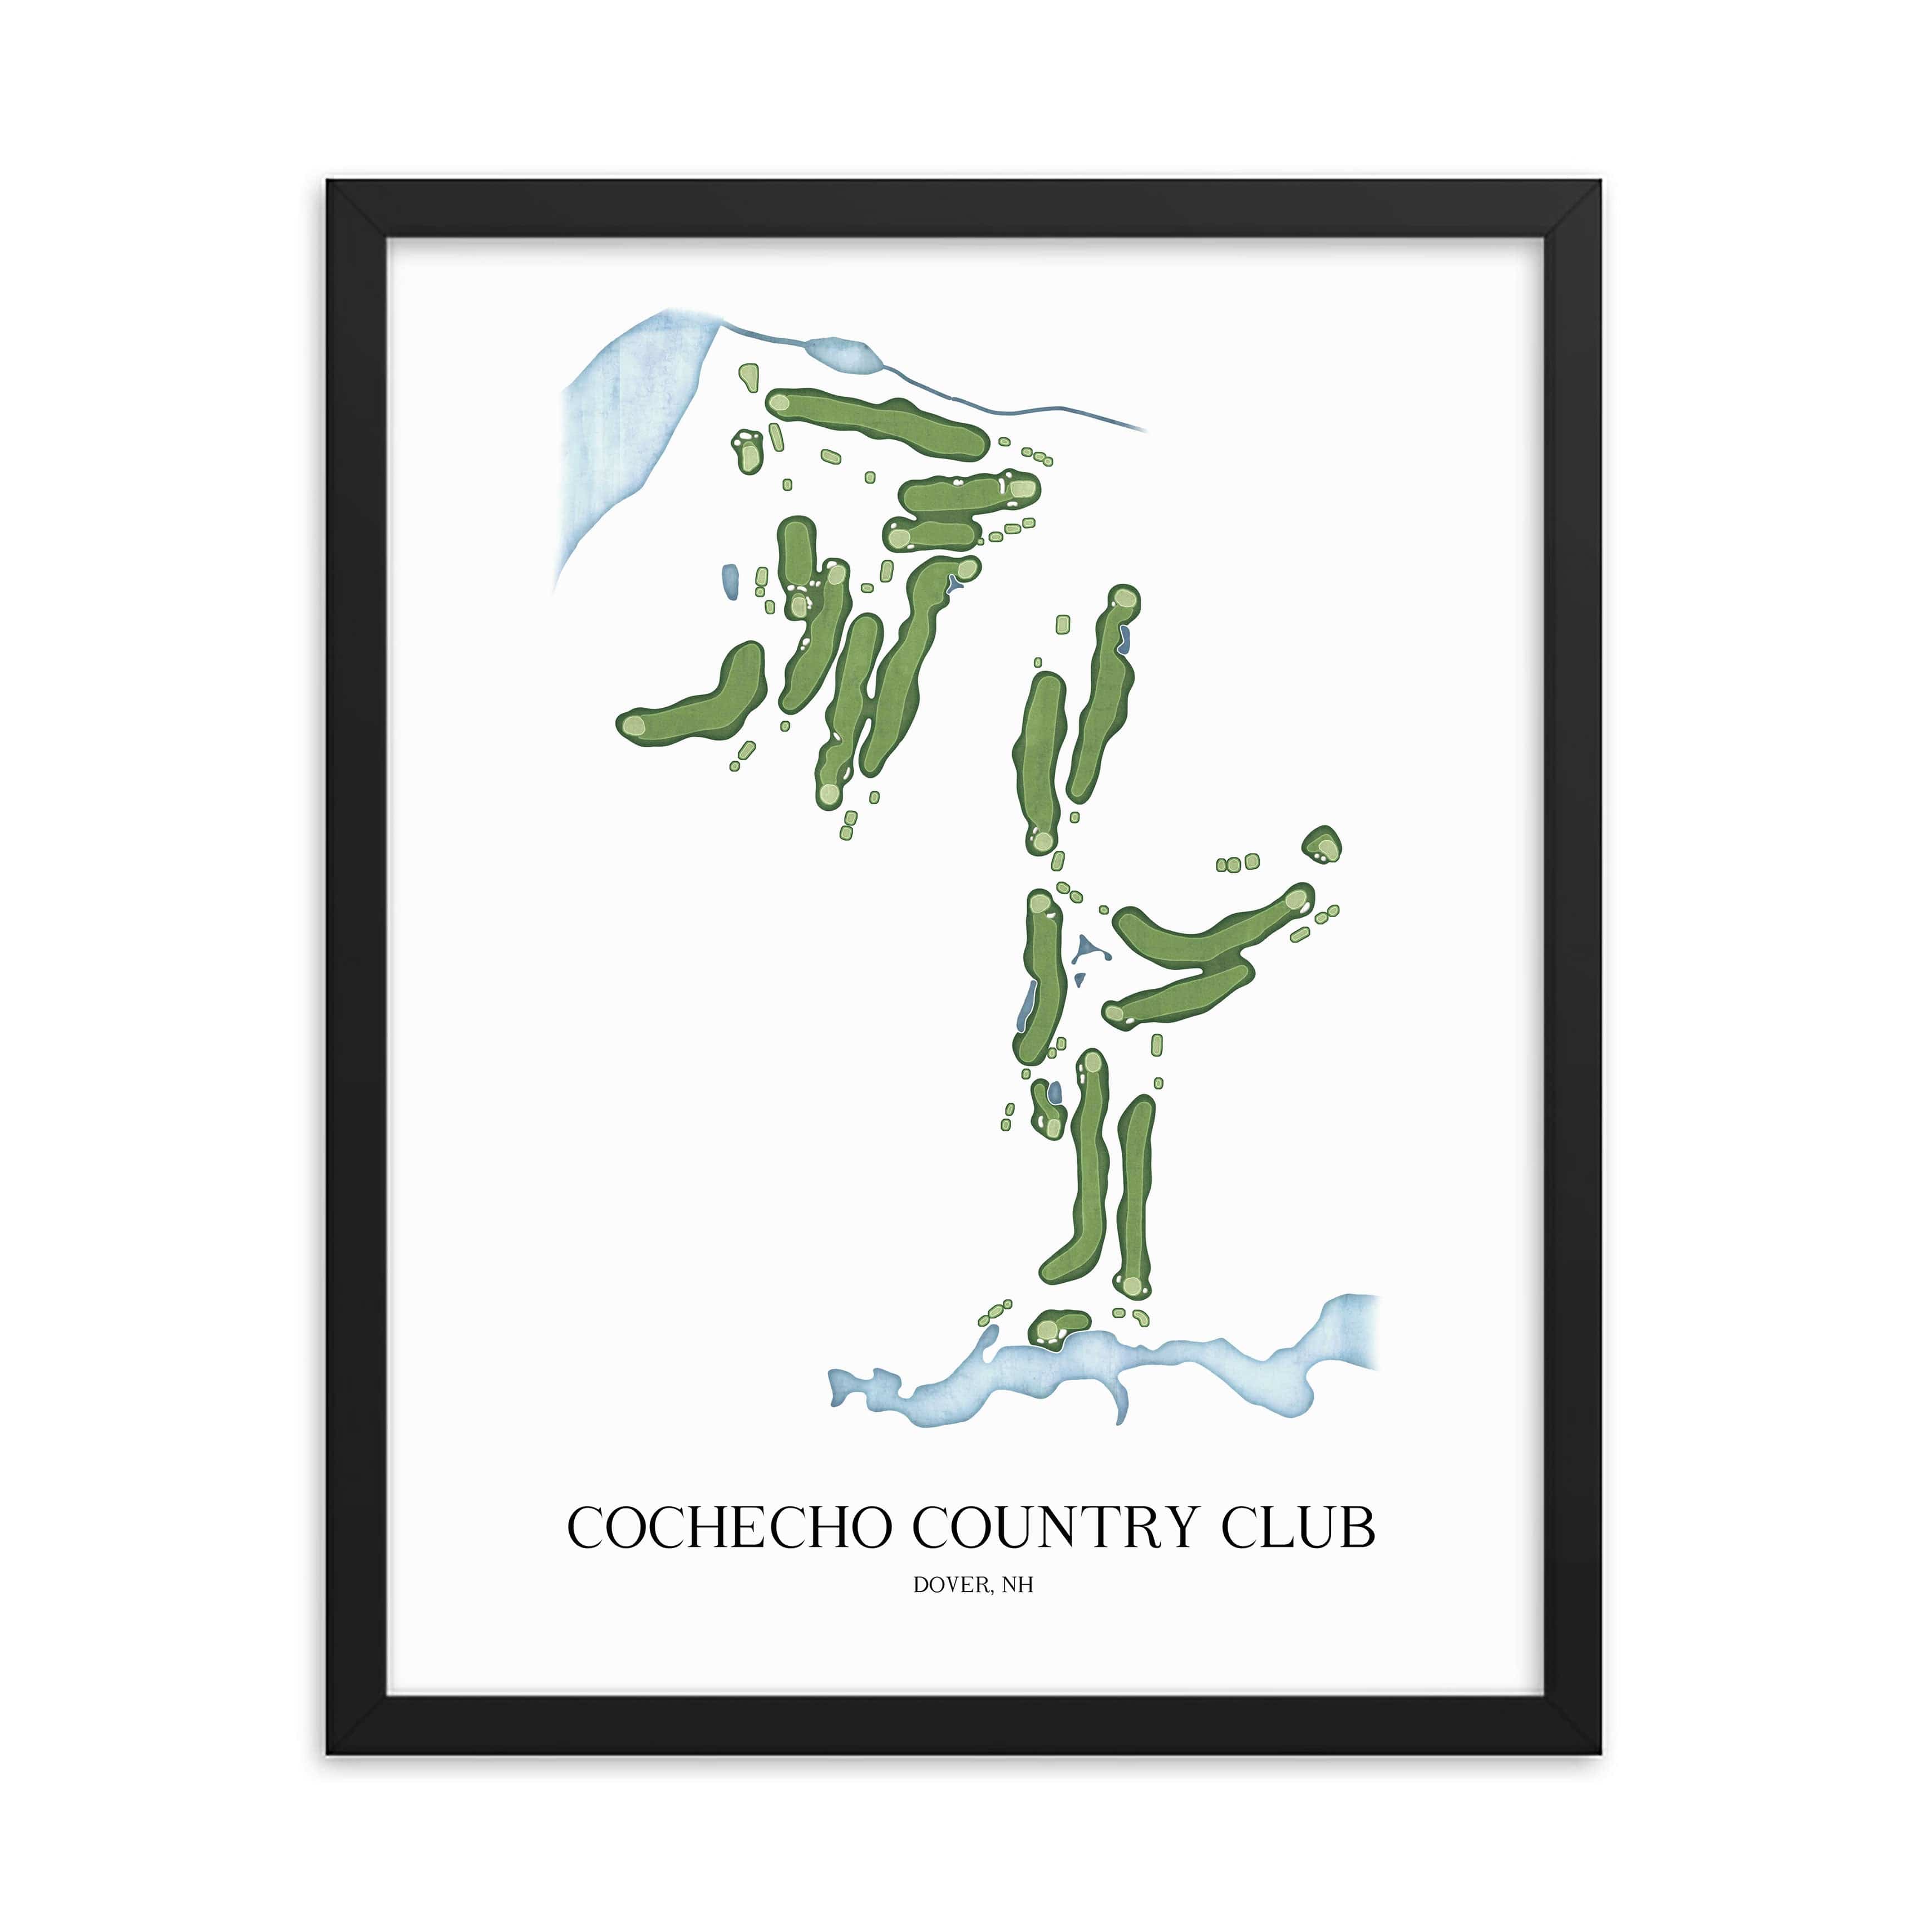 The 19th Hole Golf Shop - Golf Course Prints -  Cochecho Country Club Golf Course Map